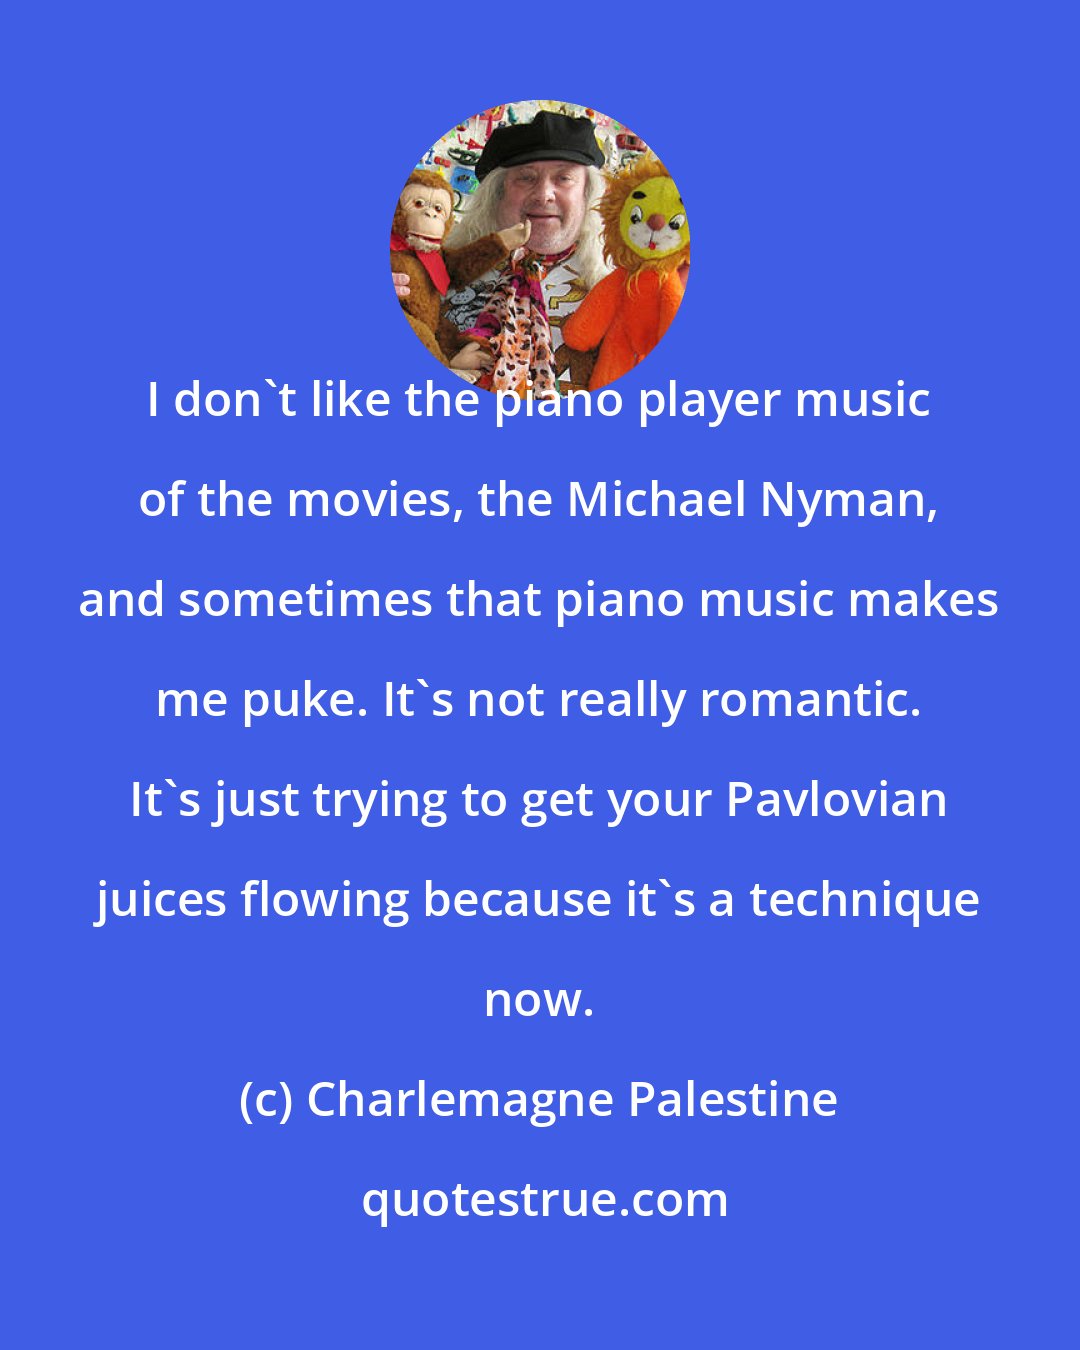 Charlemagne Palestine: I don't like the piano player music of the movies, the Michael Nyman, and sometimes that piano music makes me puke. It's not really romantic. It's just trying to get your Pavlovian juices flowing because it's a technique now.